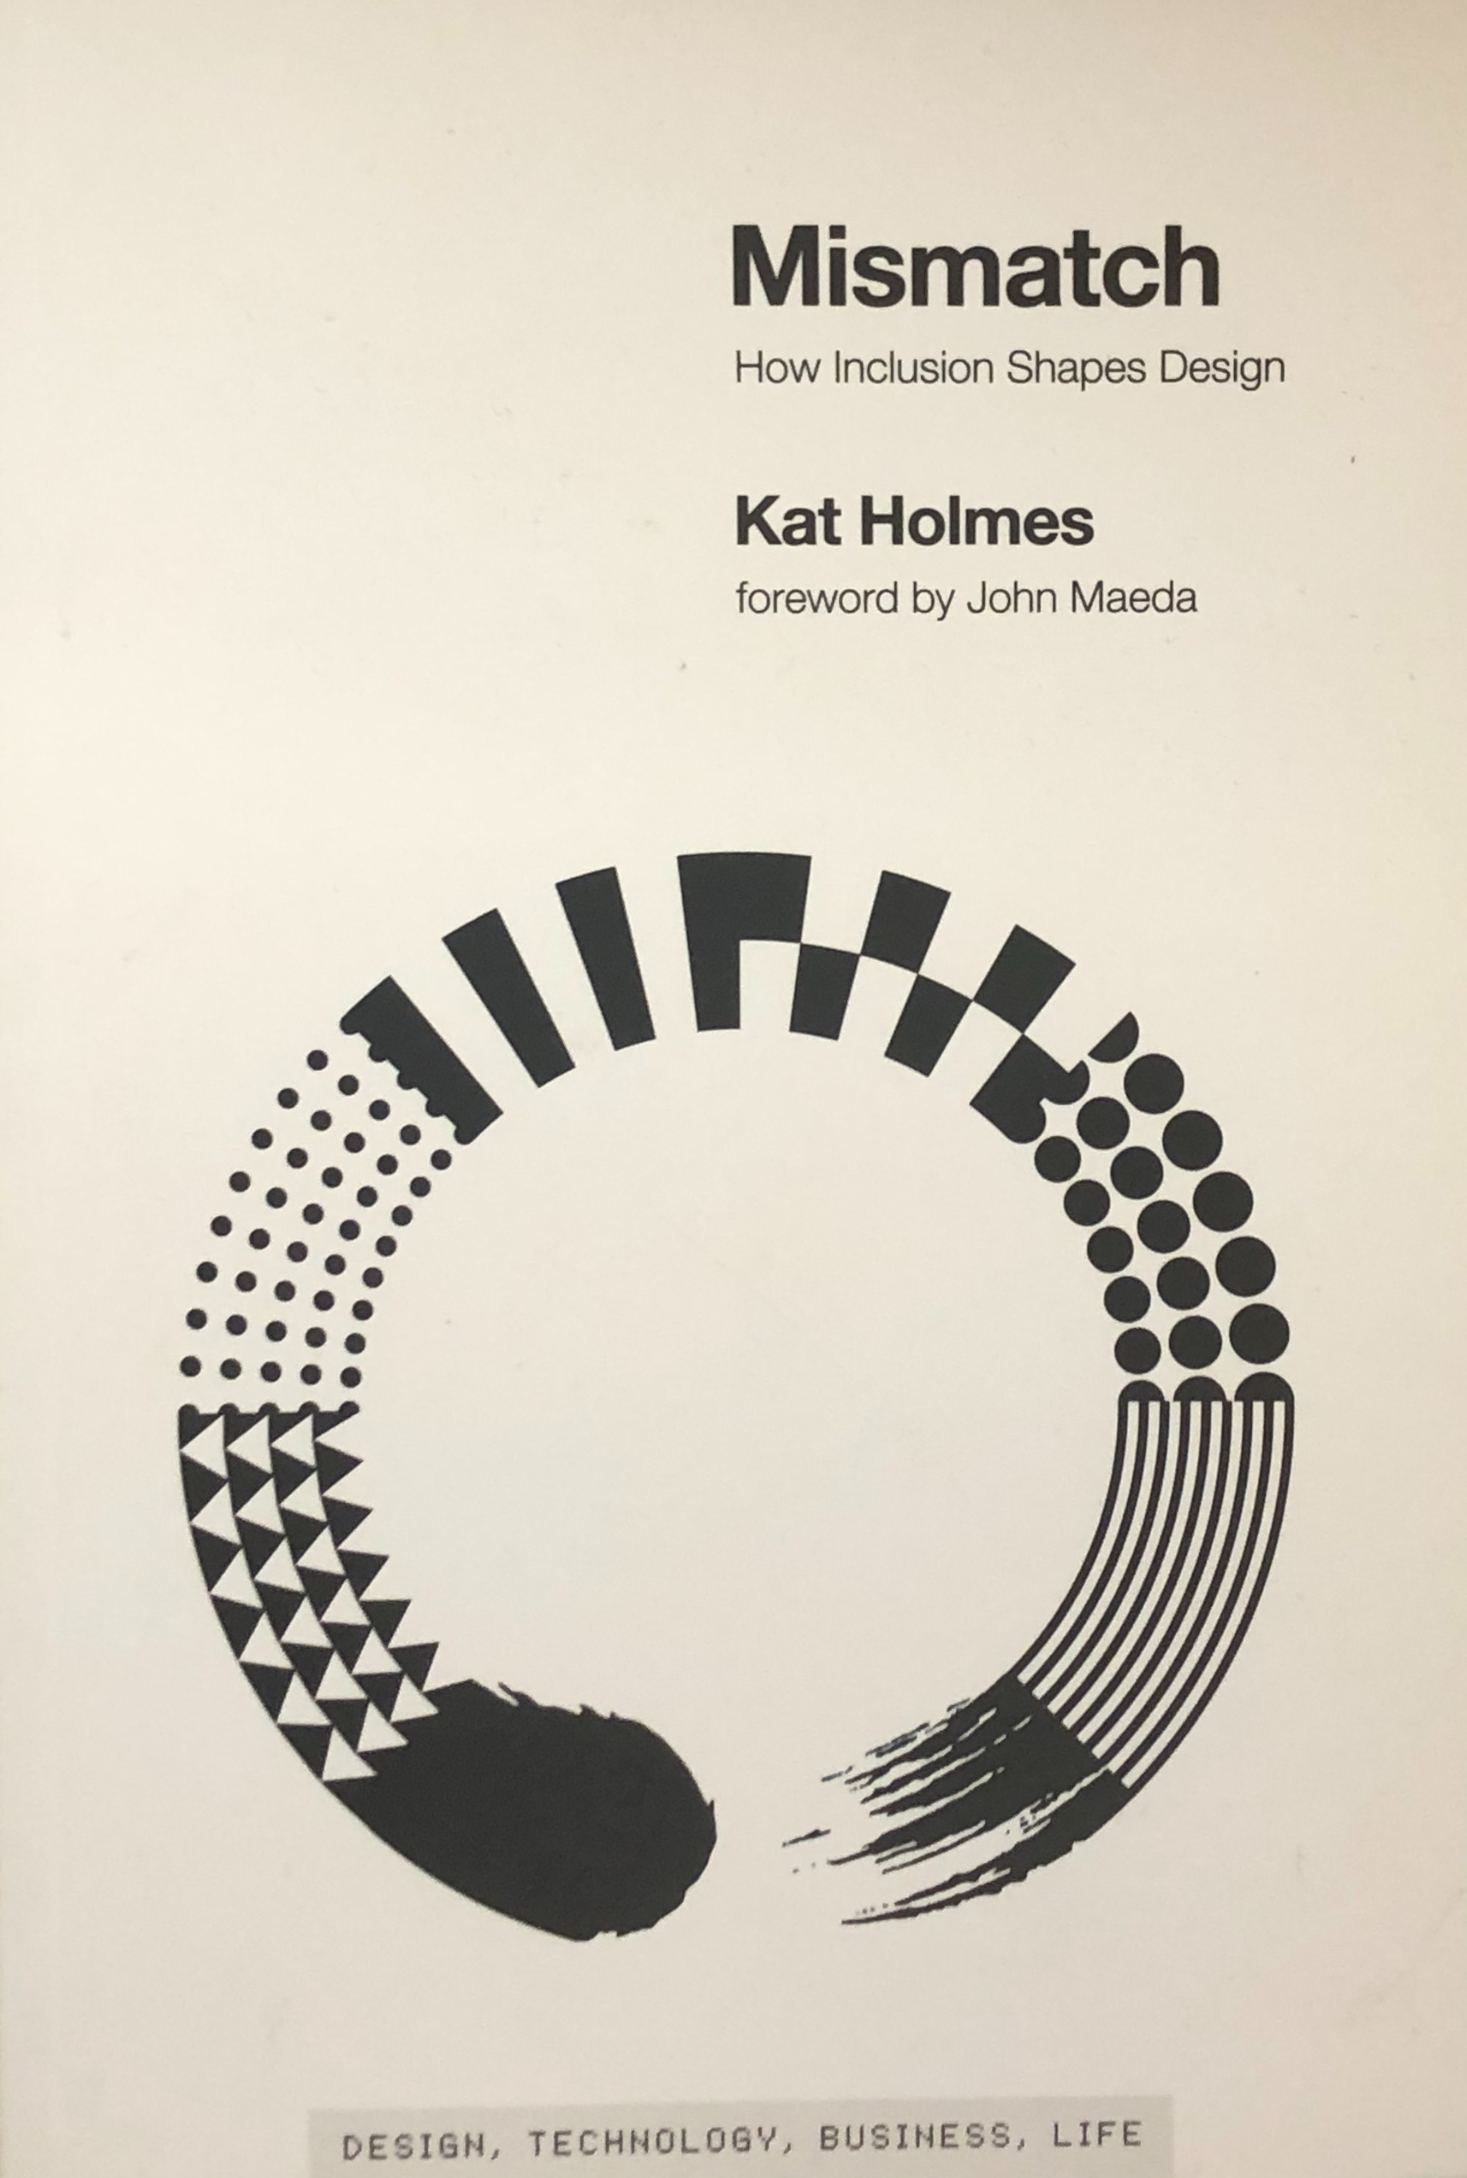 The black and white cover for the book Mismatch. The cover is a white cover with black lettering and shows an incomplete circle made up of 8 different patterns. Verbiage includes "foreword by John Maeda" underneath Kat Holmes' name and "Design, Technology, Business, Life" at the bottom of the cover.